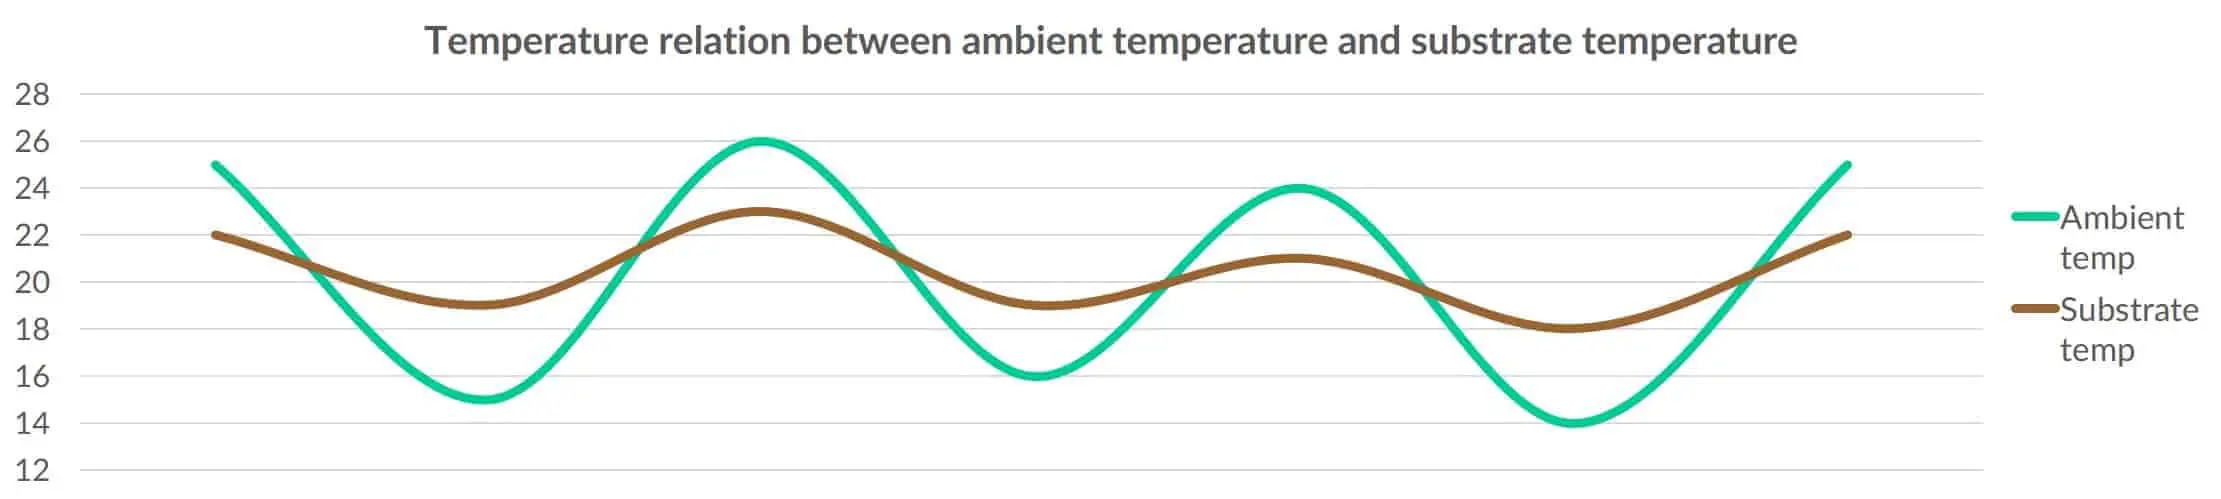 Temperature relation between the ambient temperature and the temperature of the substrate